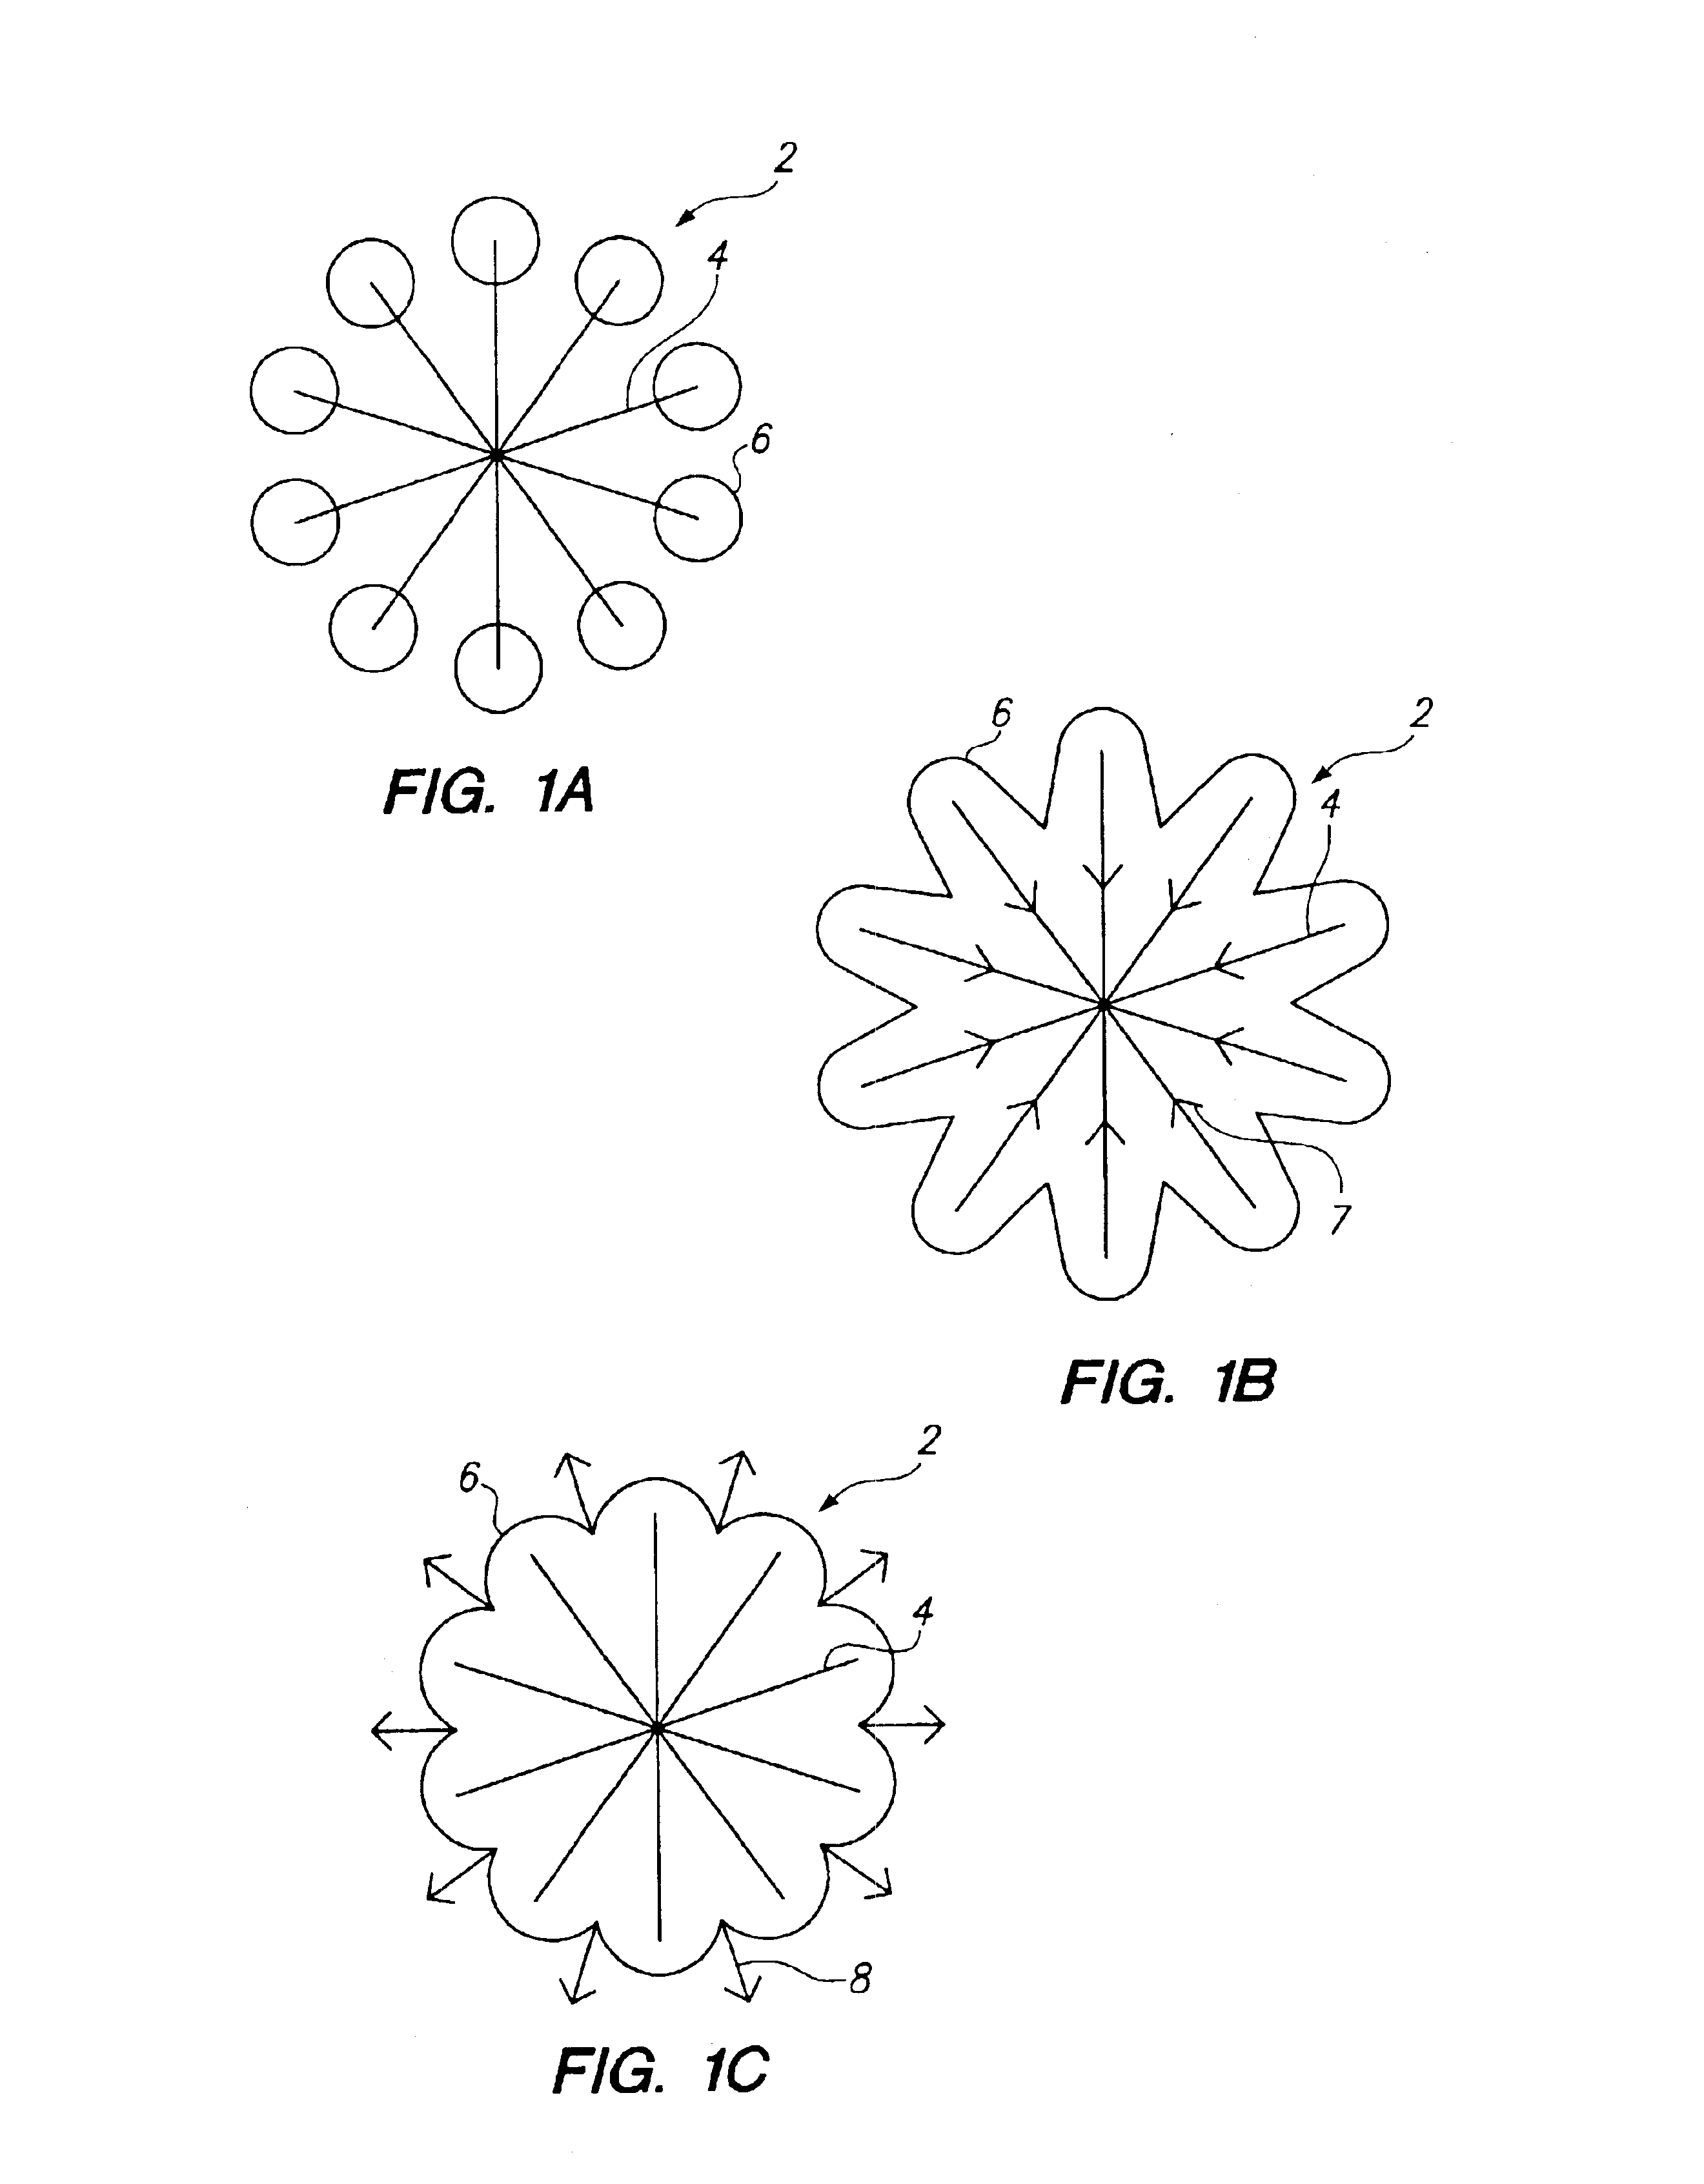 Angle indexer for medical devices